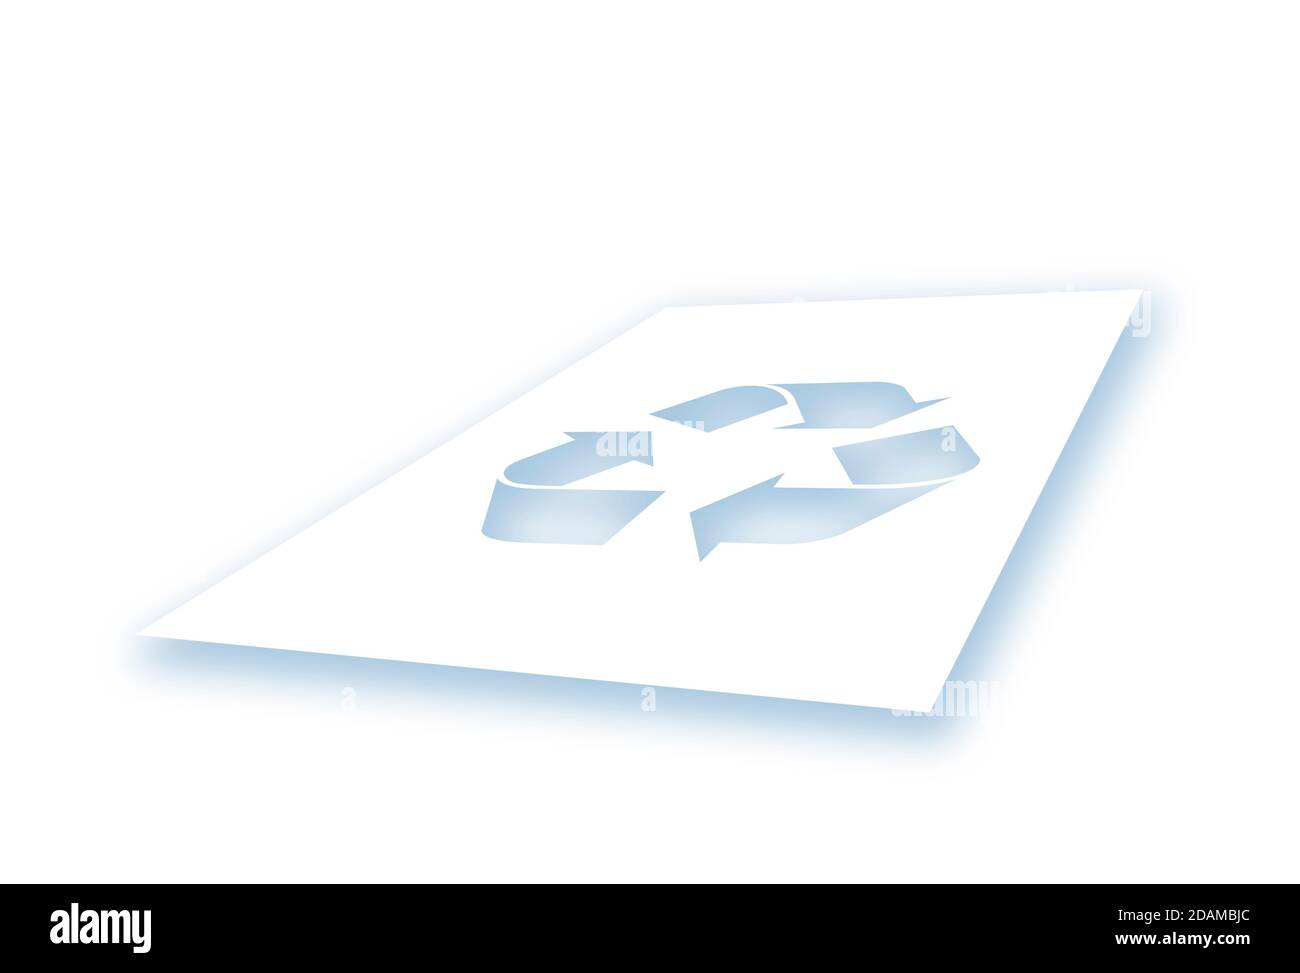 Sheet of paper with recycling symbol, illustration. Stock Photo